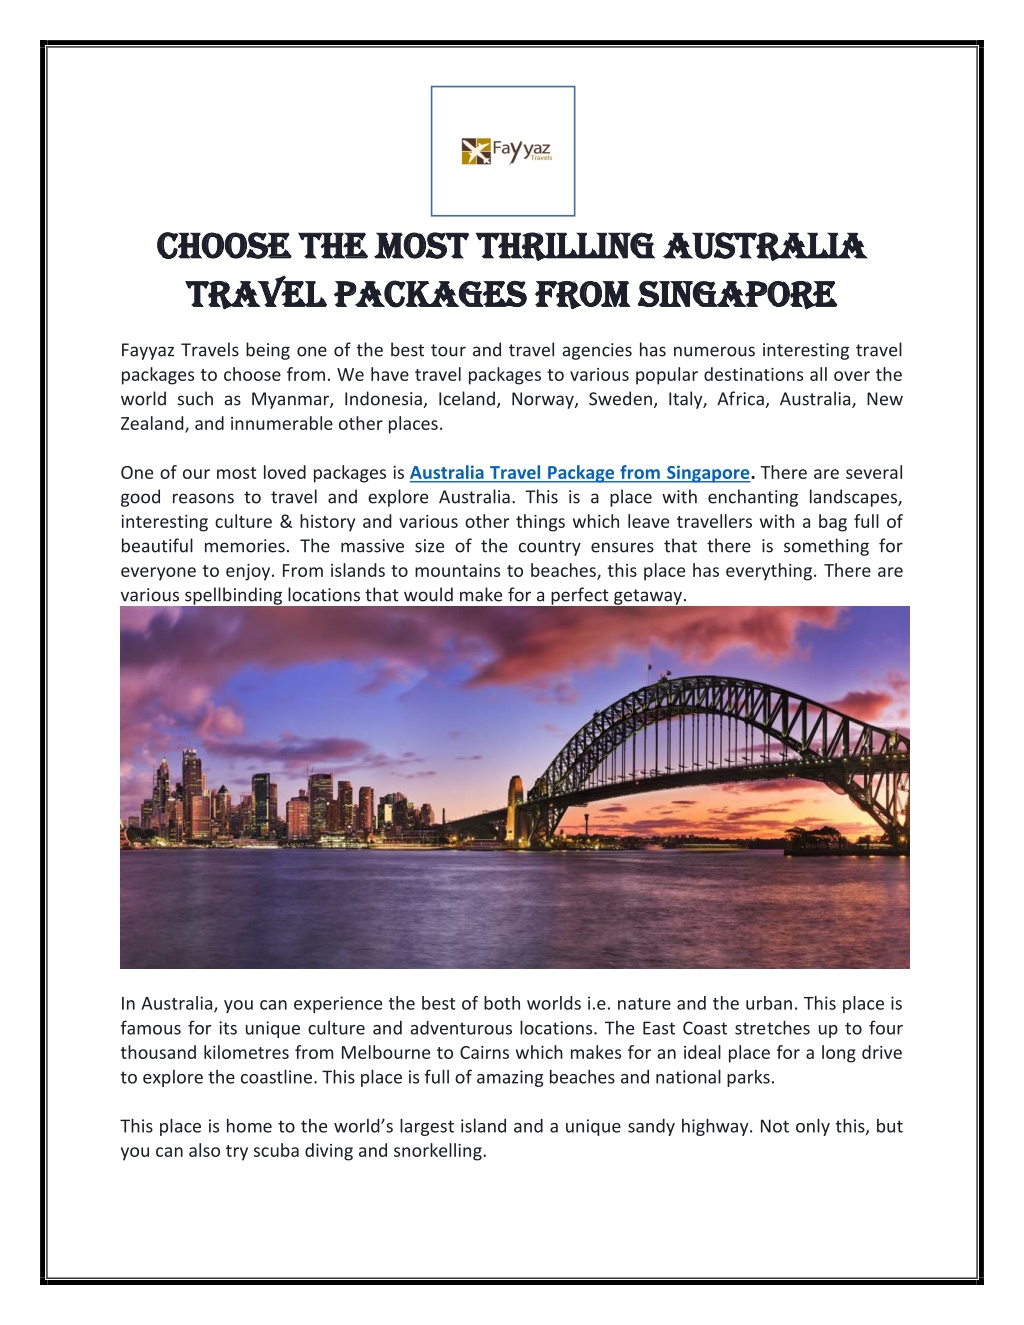 australia travel packages from singapore